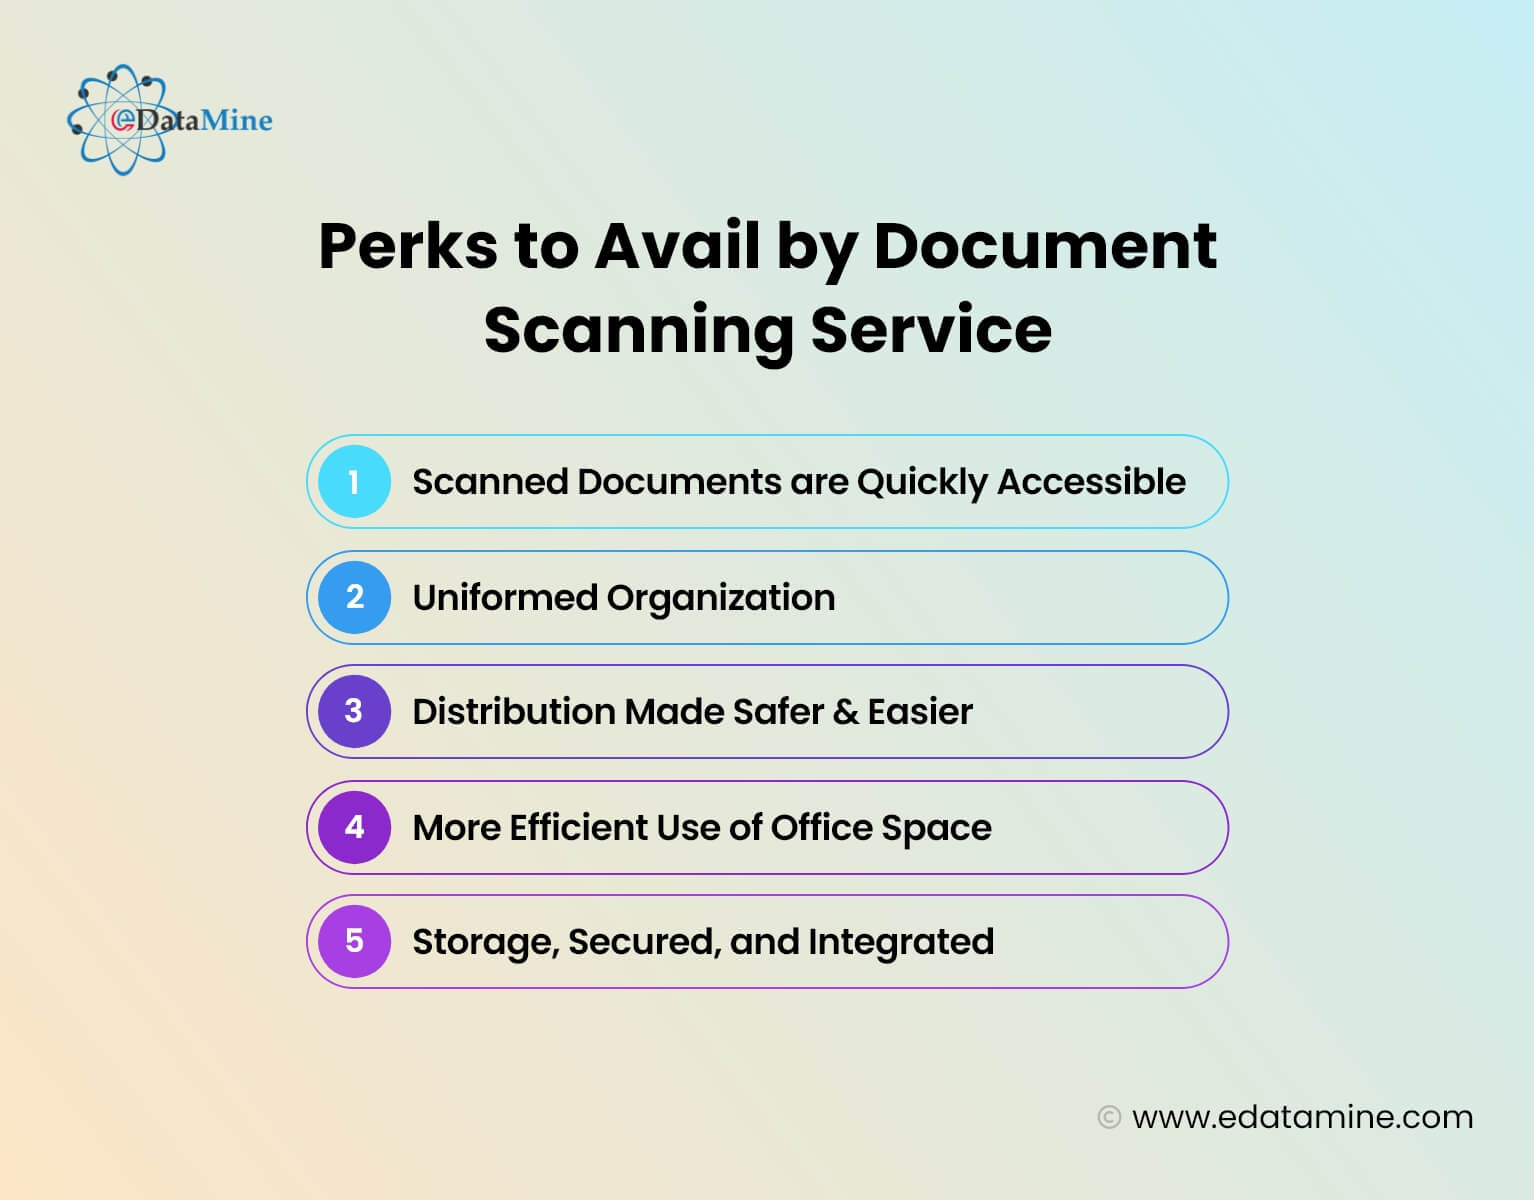 Perks to Avail by Document Scanning Service